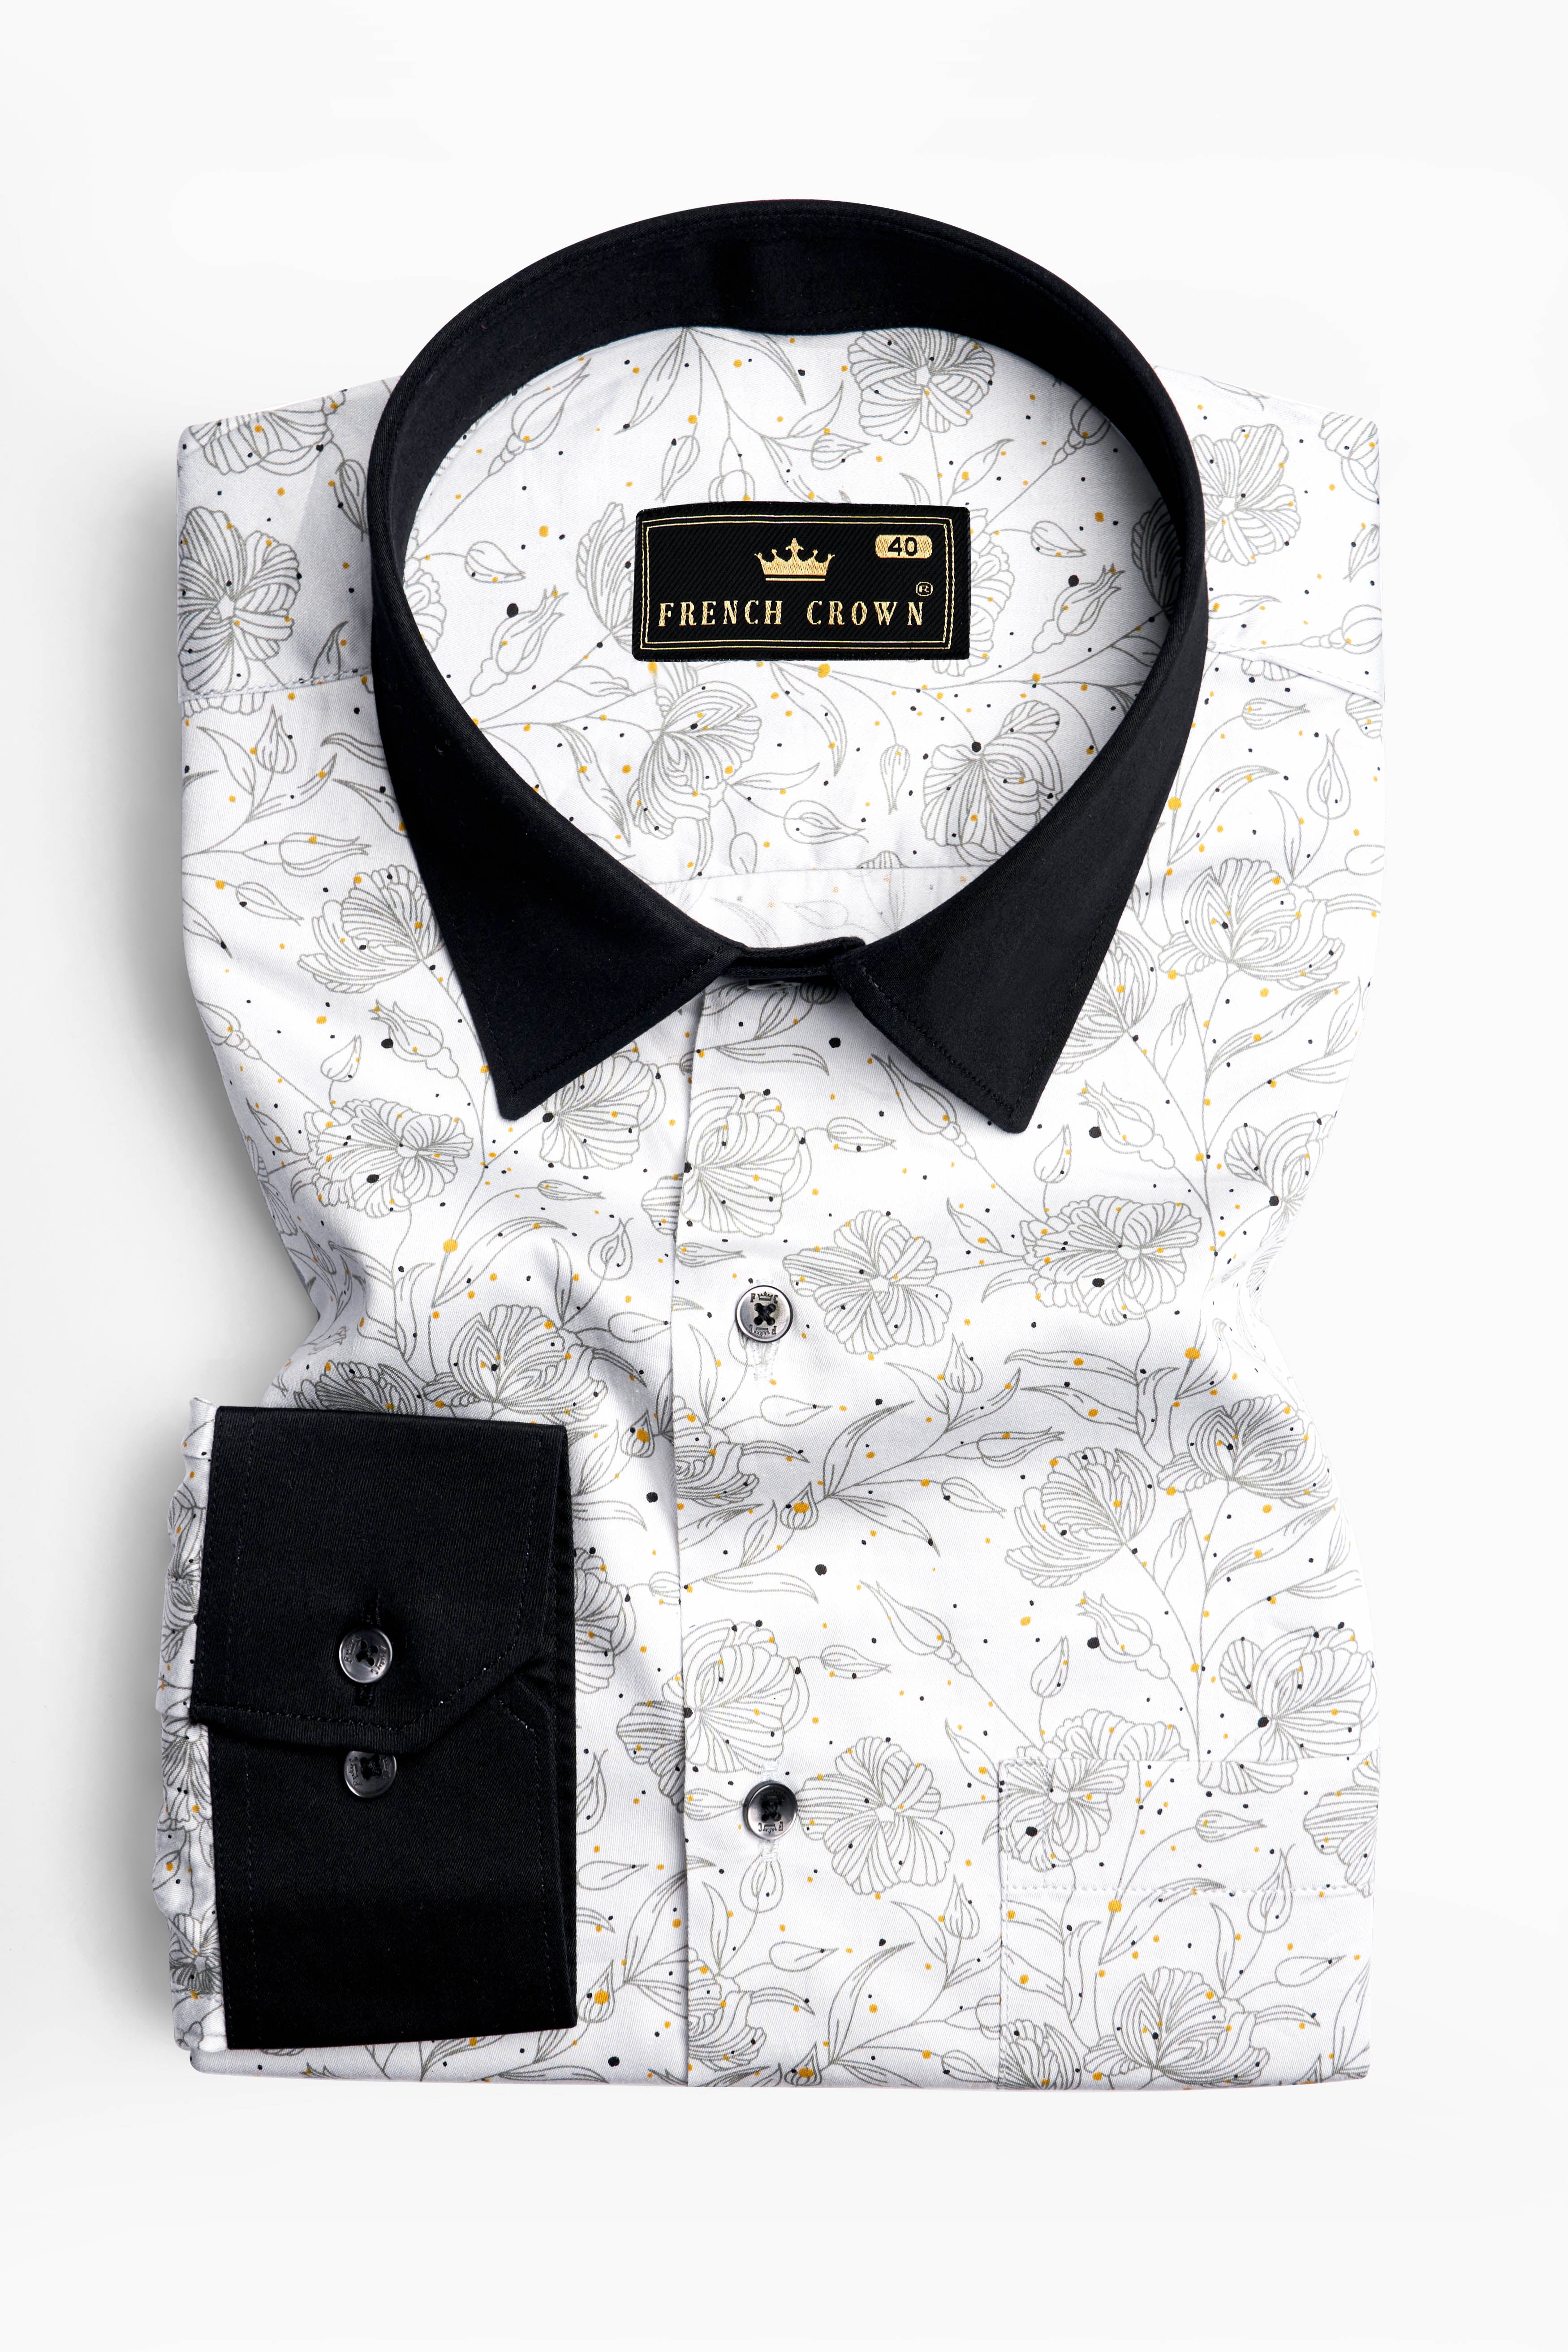 Bright White Floral Printed with Black Cuffs and Collar Super Soft Premium Cotton Shirt